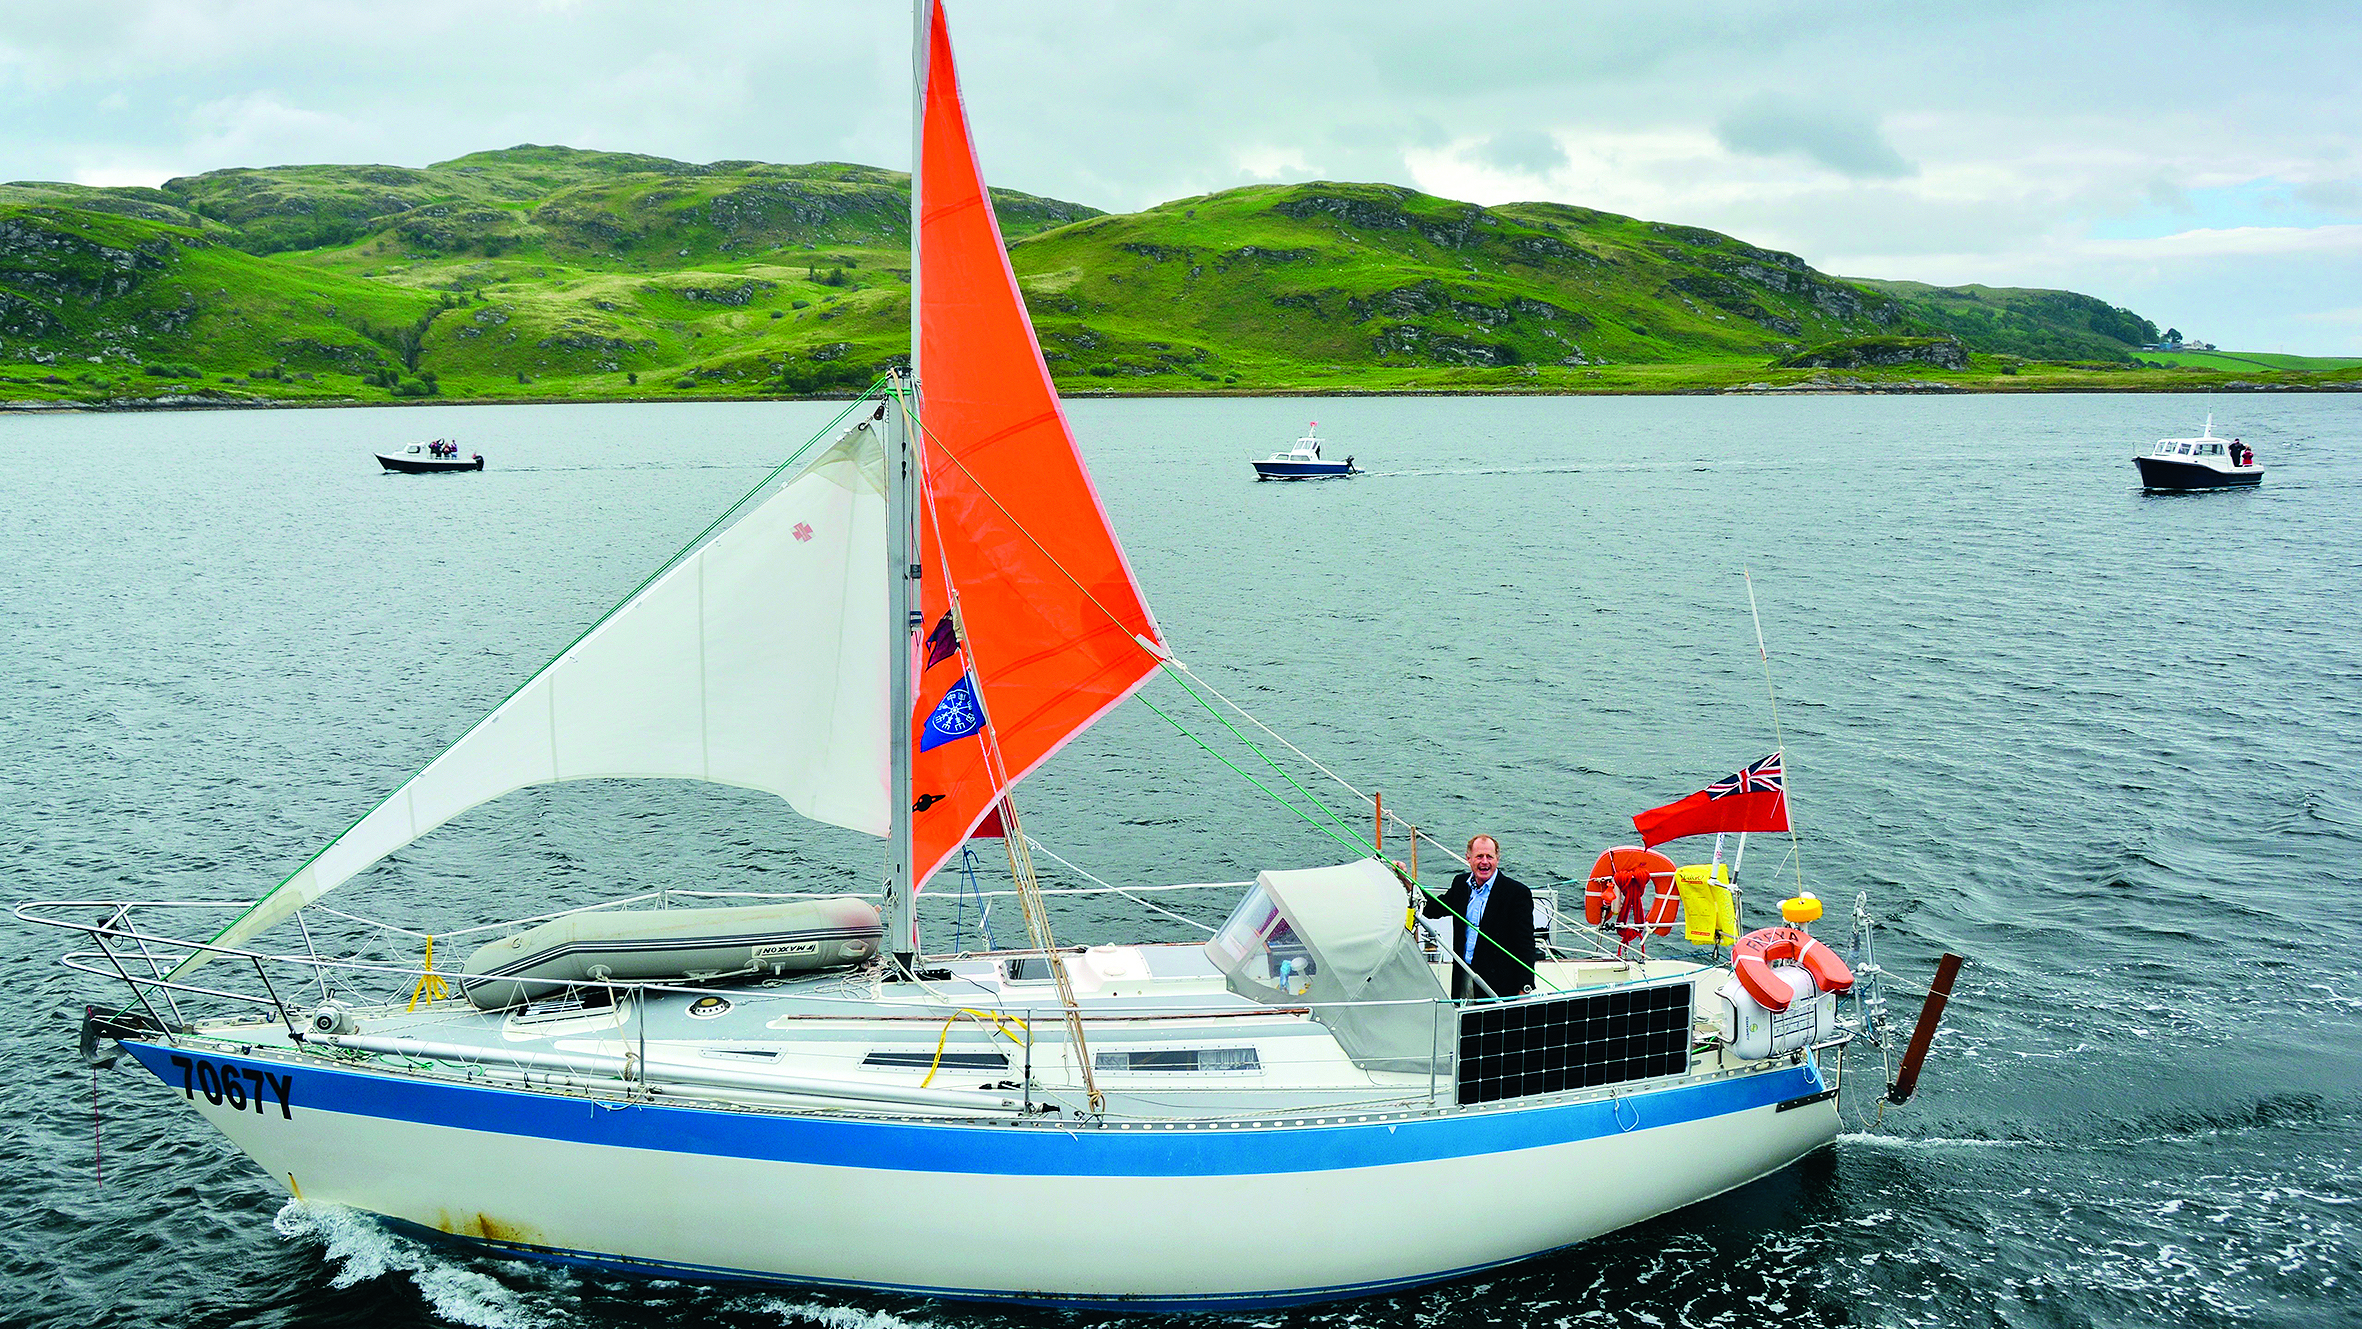 Dismasted offshore: Jock arriving home in Tighnabruaich after sailing 1,500 miles under jury rig